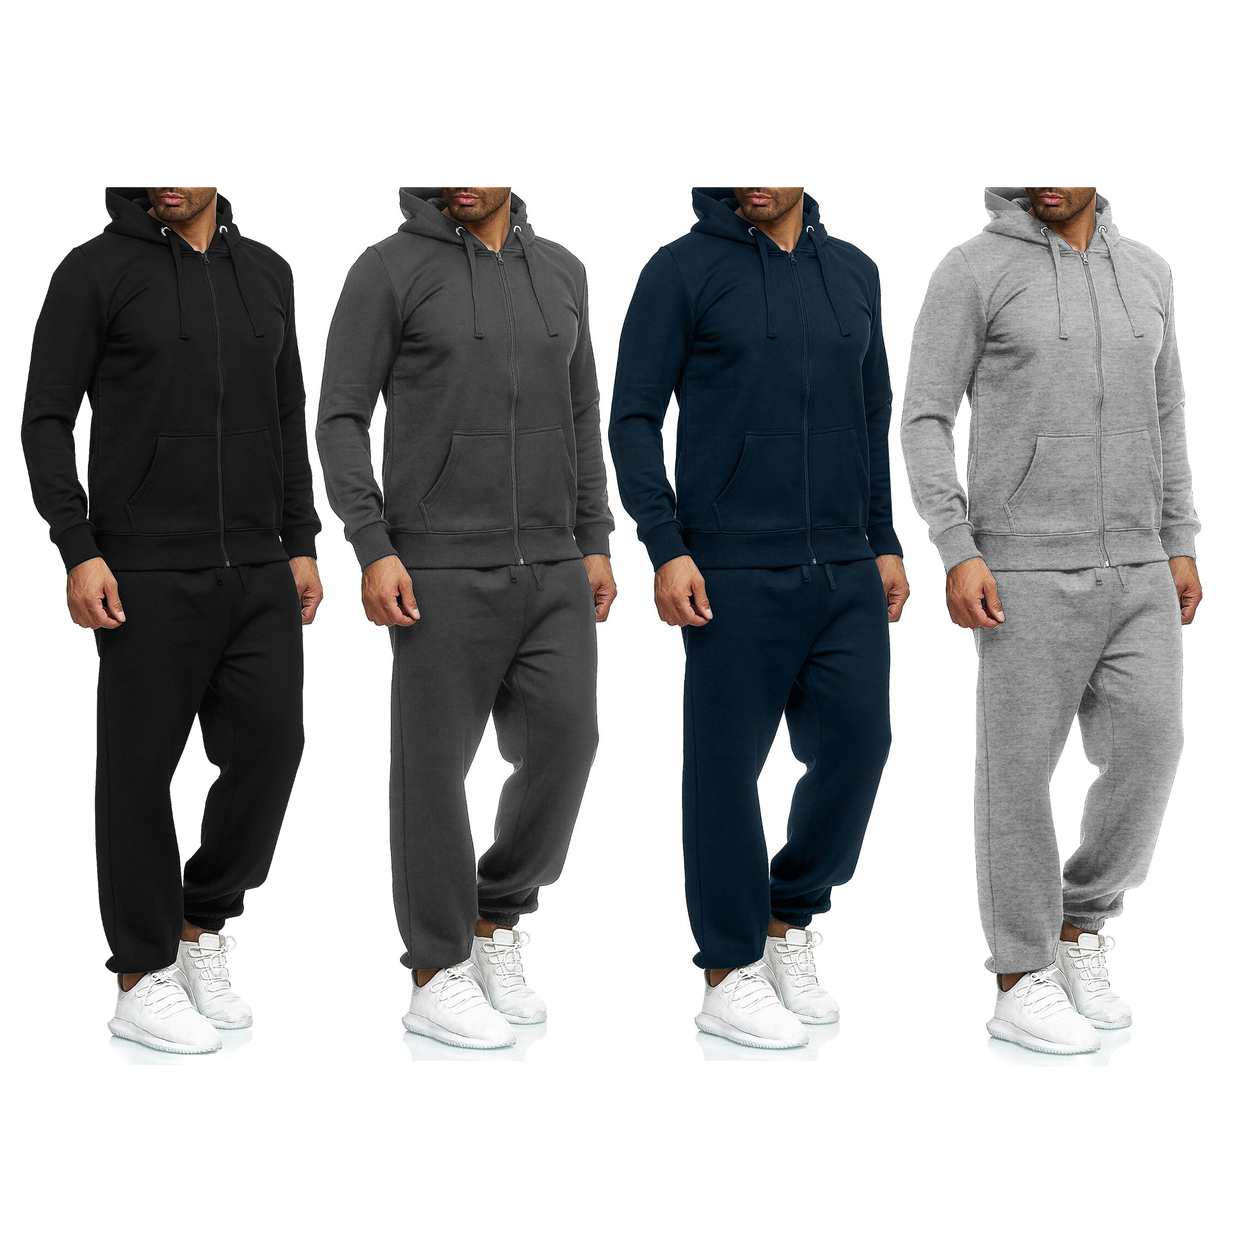 Multi-Pack: Men's Casual Big & Tall Athletic Active Winter Warm Fleece Lined Full Zip Tracksuit Jogger Set - Grey, 1-pack, Xx-large